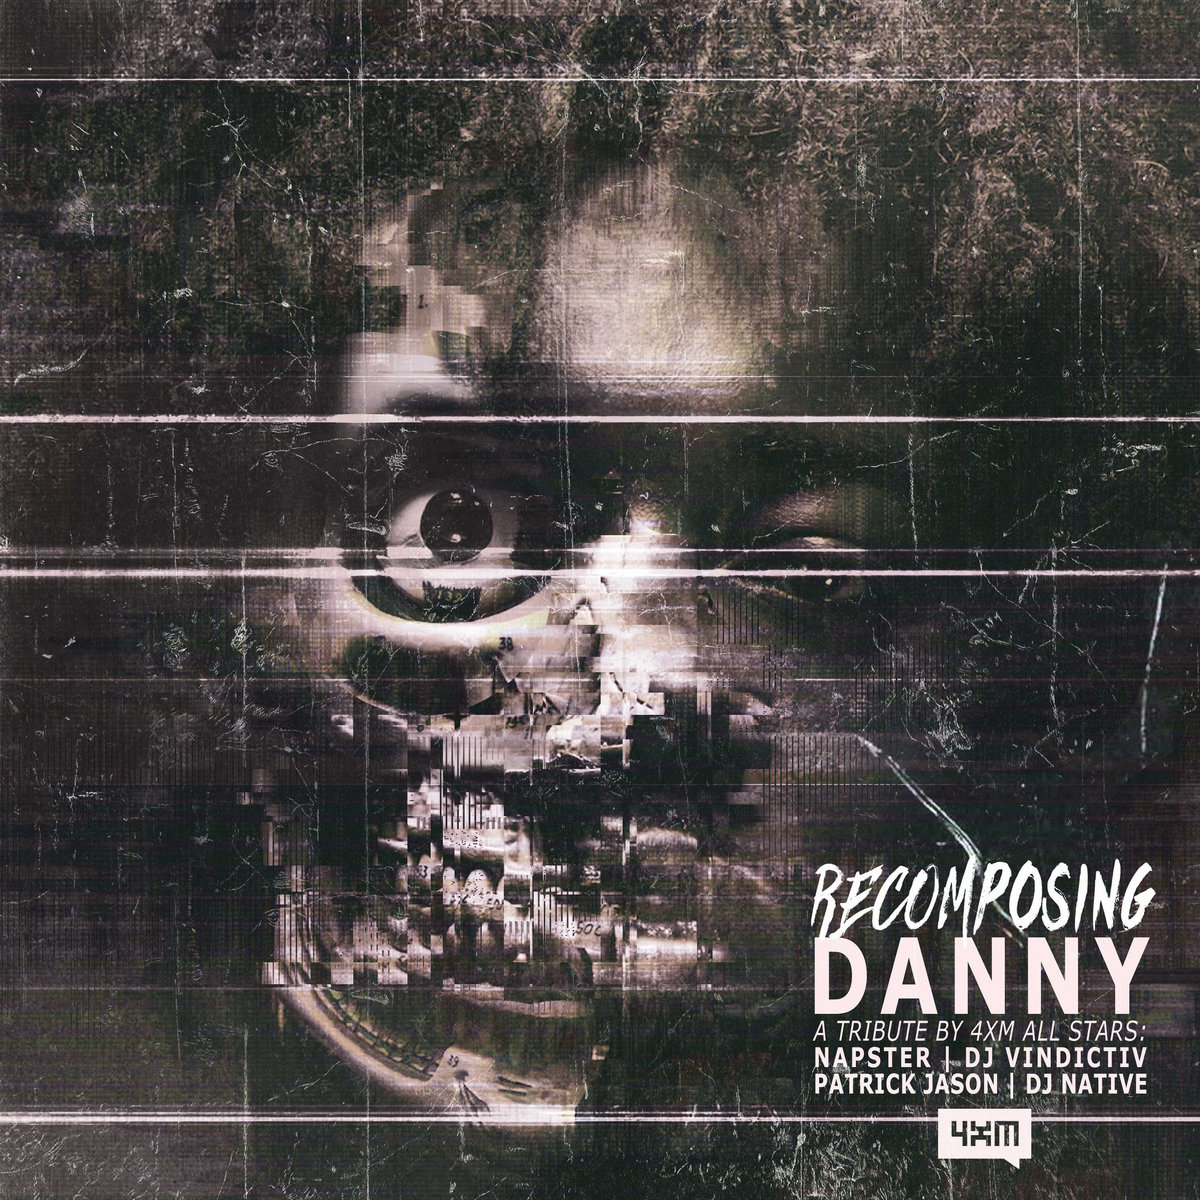 Recomposing Danny by Danny Brown x 4XM All Stars